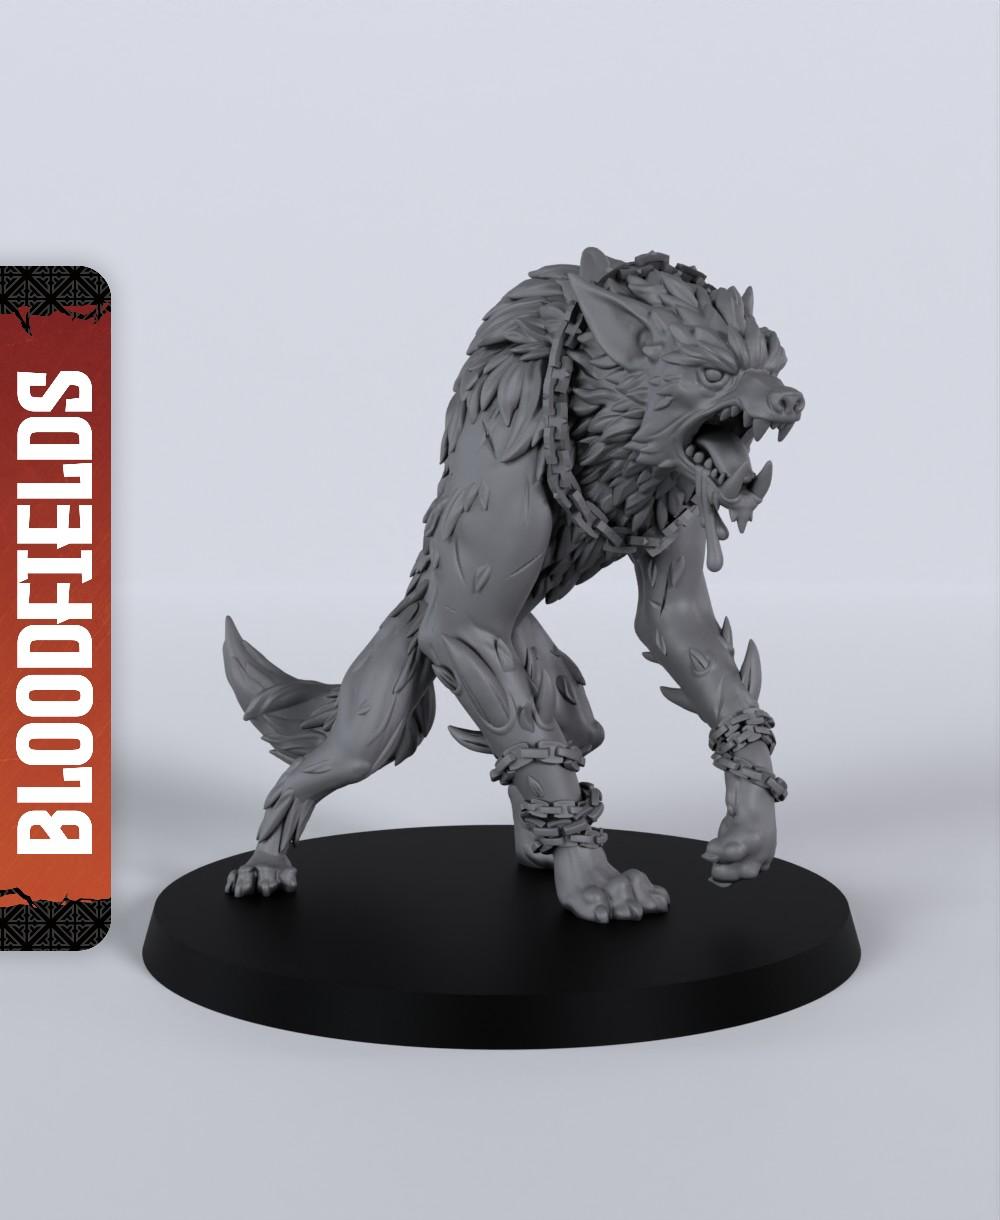 Mo Ris (Werewolf Ogre) - With Free Dragon Warhammer - 5e DnD Inspired for RPG and Wargamers 3d model